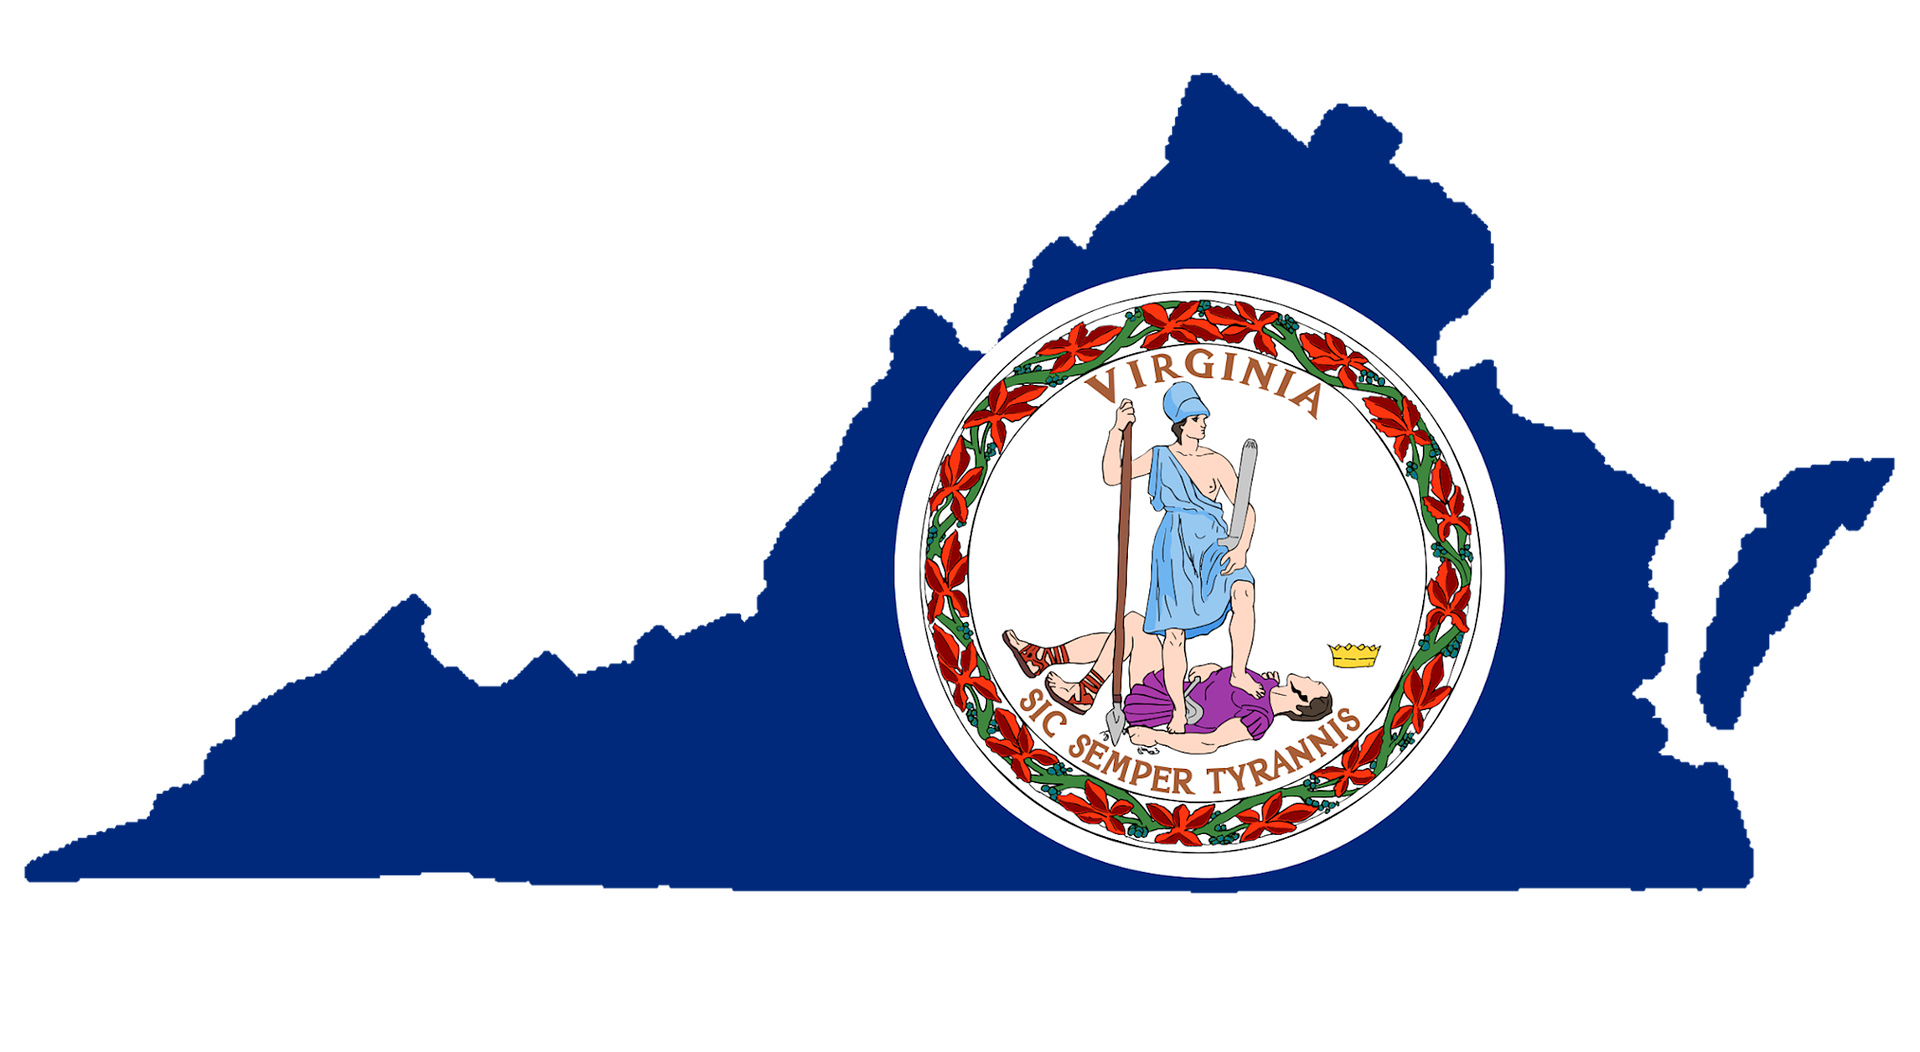 Image of virginia state and shield. Virginia has a new data privacy law.